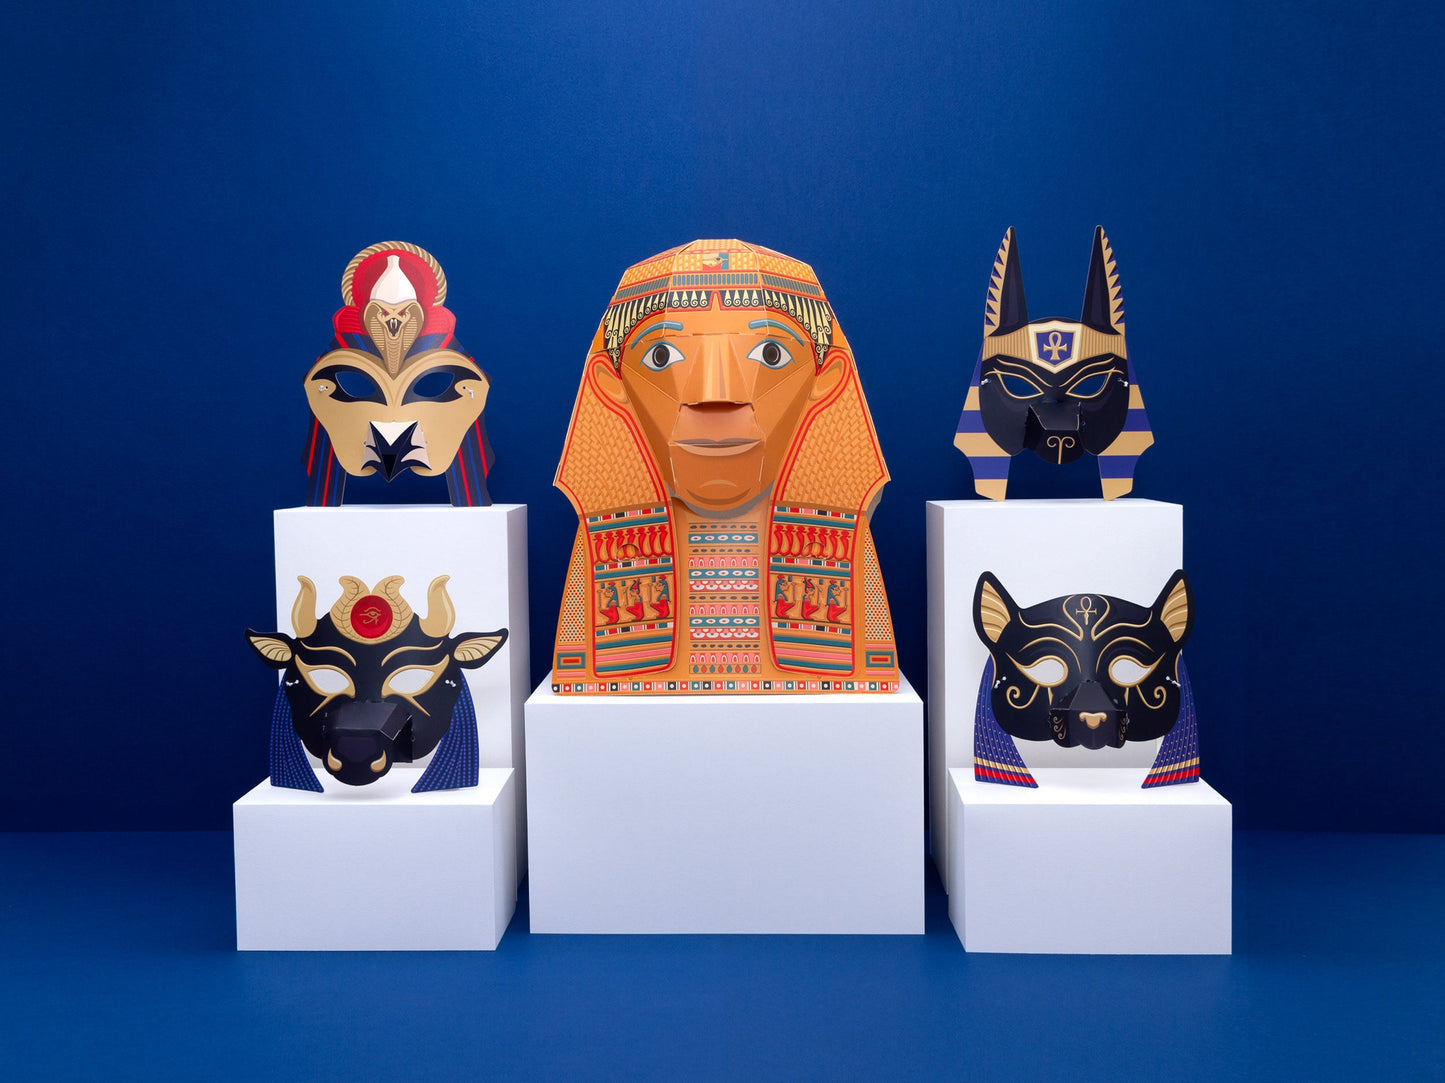 The headmask in a lifestyle shot with the four animal masks around it. All five masks are on vraiously sized white rectangular boxes and the background is blue.